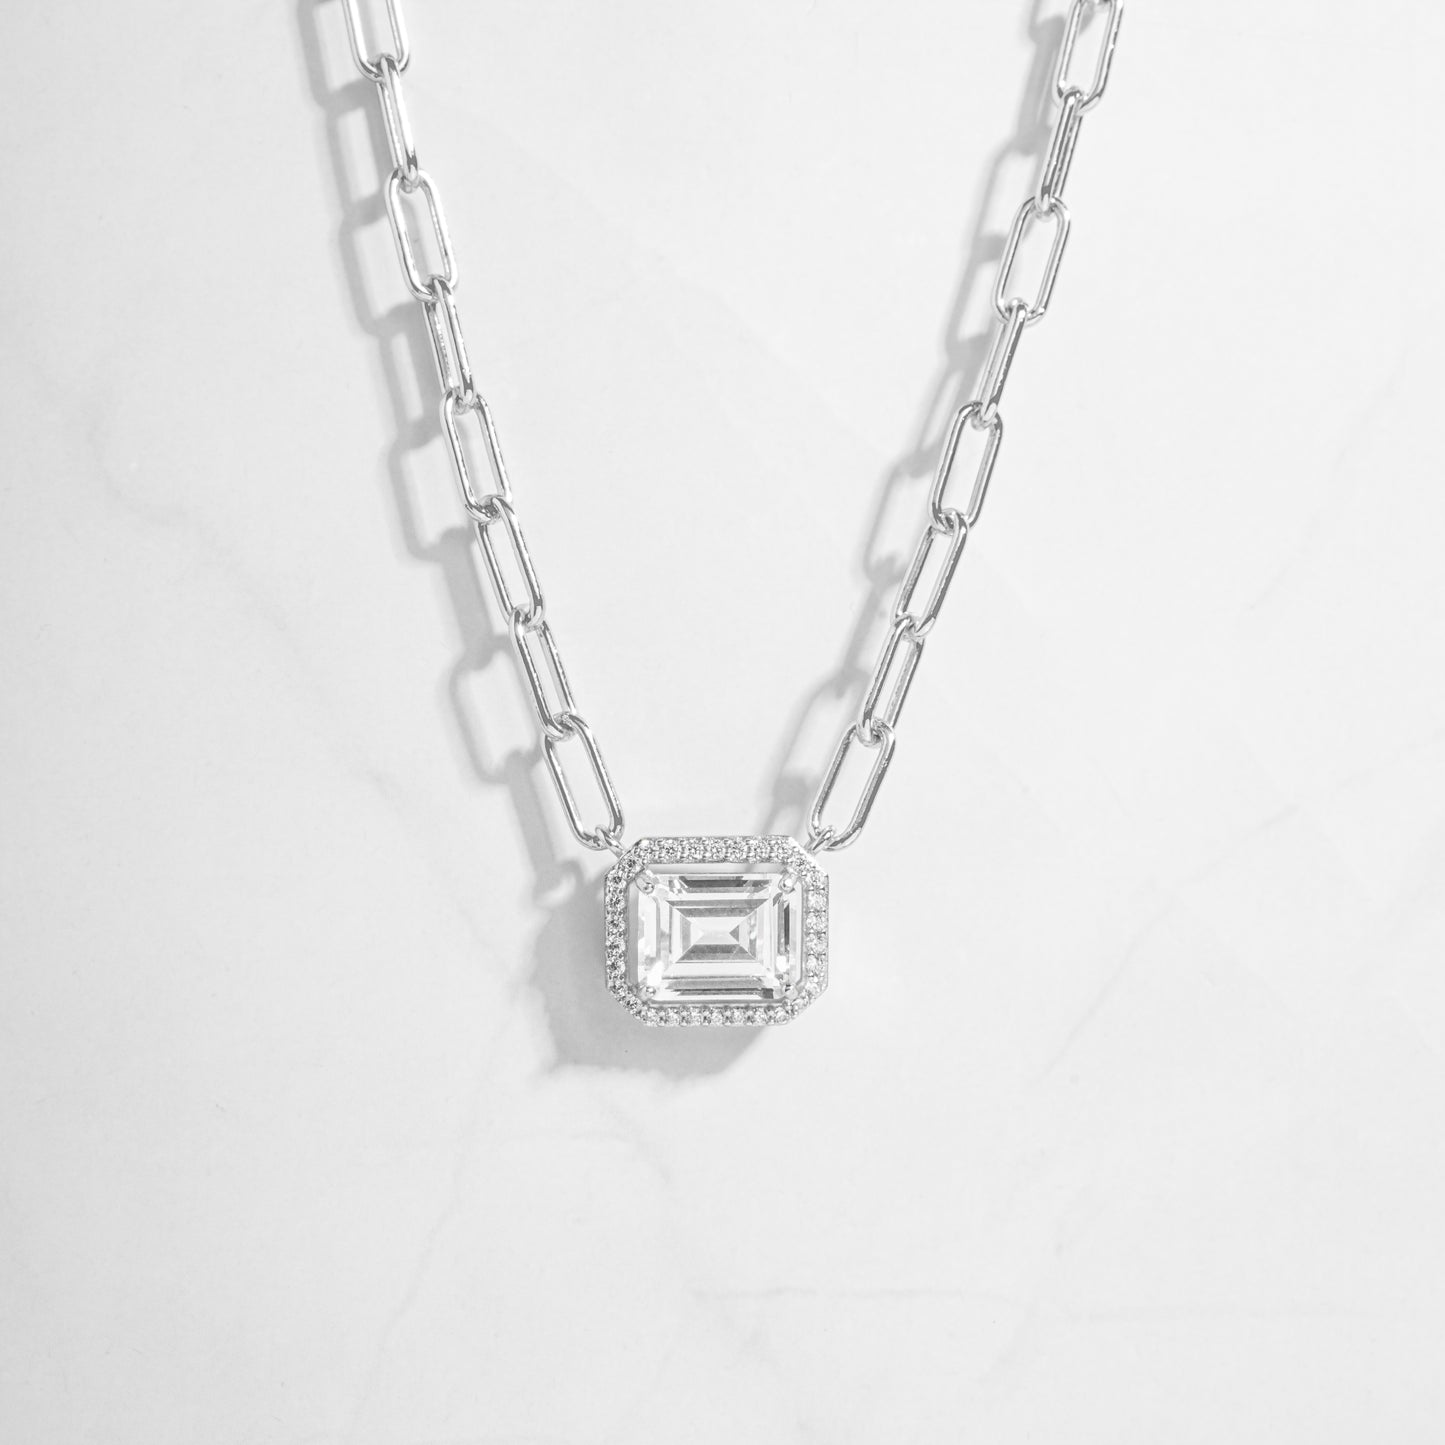 a necklace with a baguette pendant on a chain